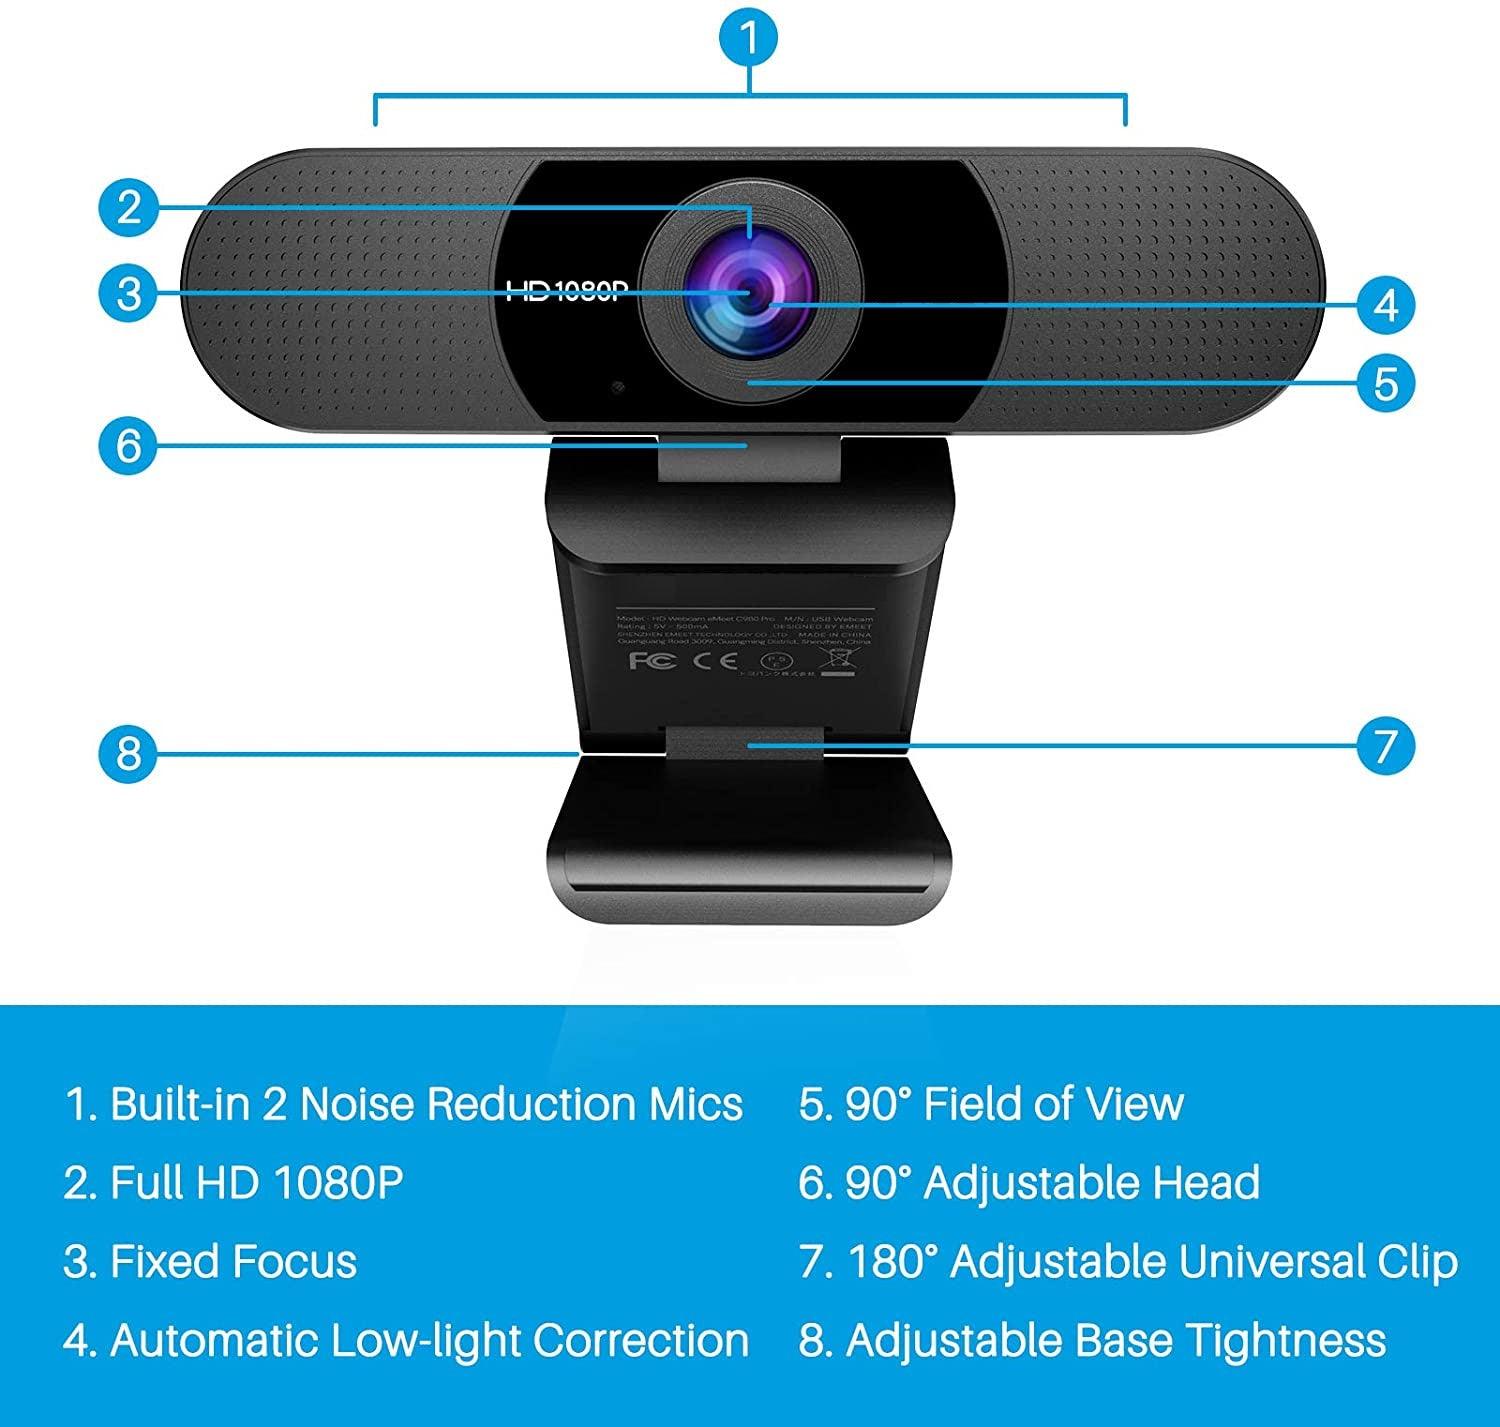 Webcam Features and Specifications